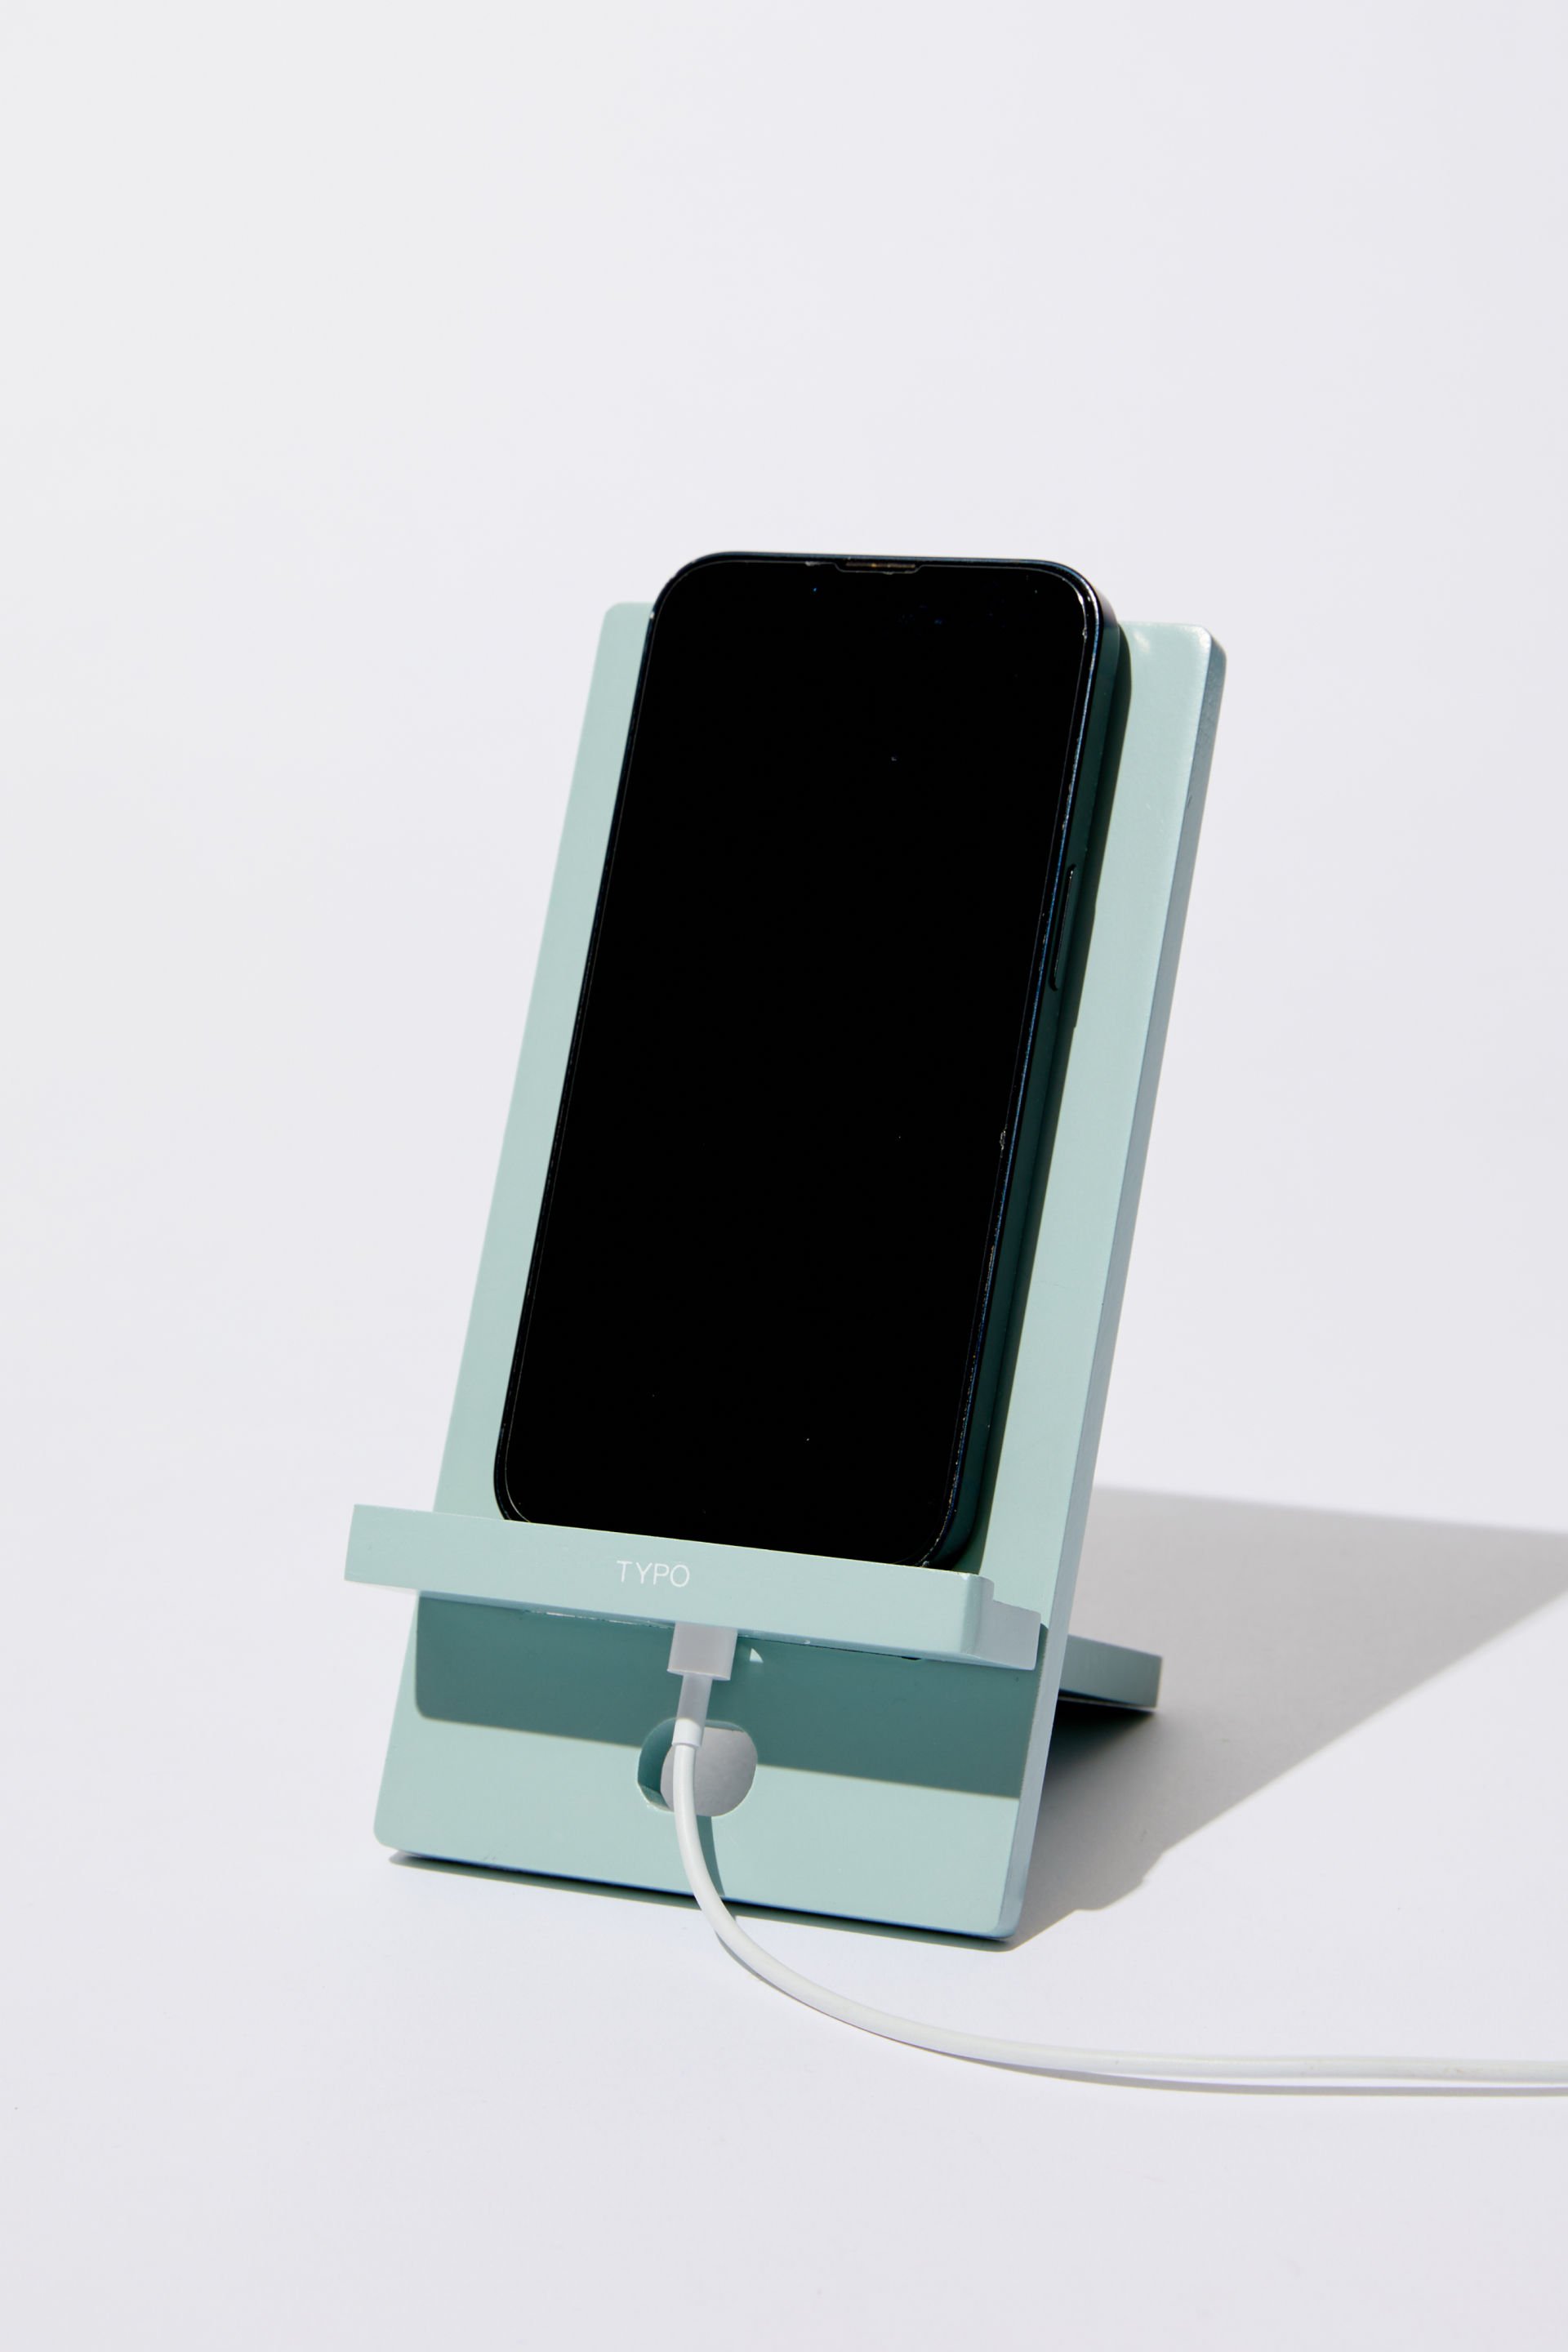 Typo - On Hold Phone Stand - Smoke green